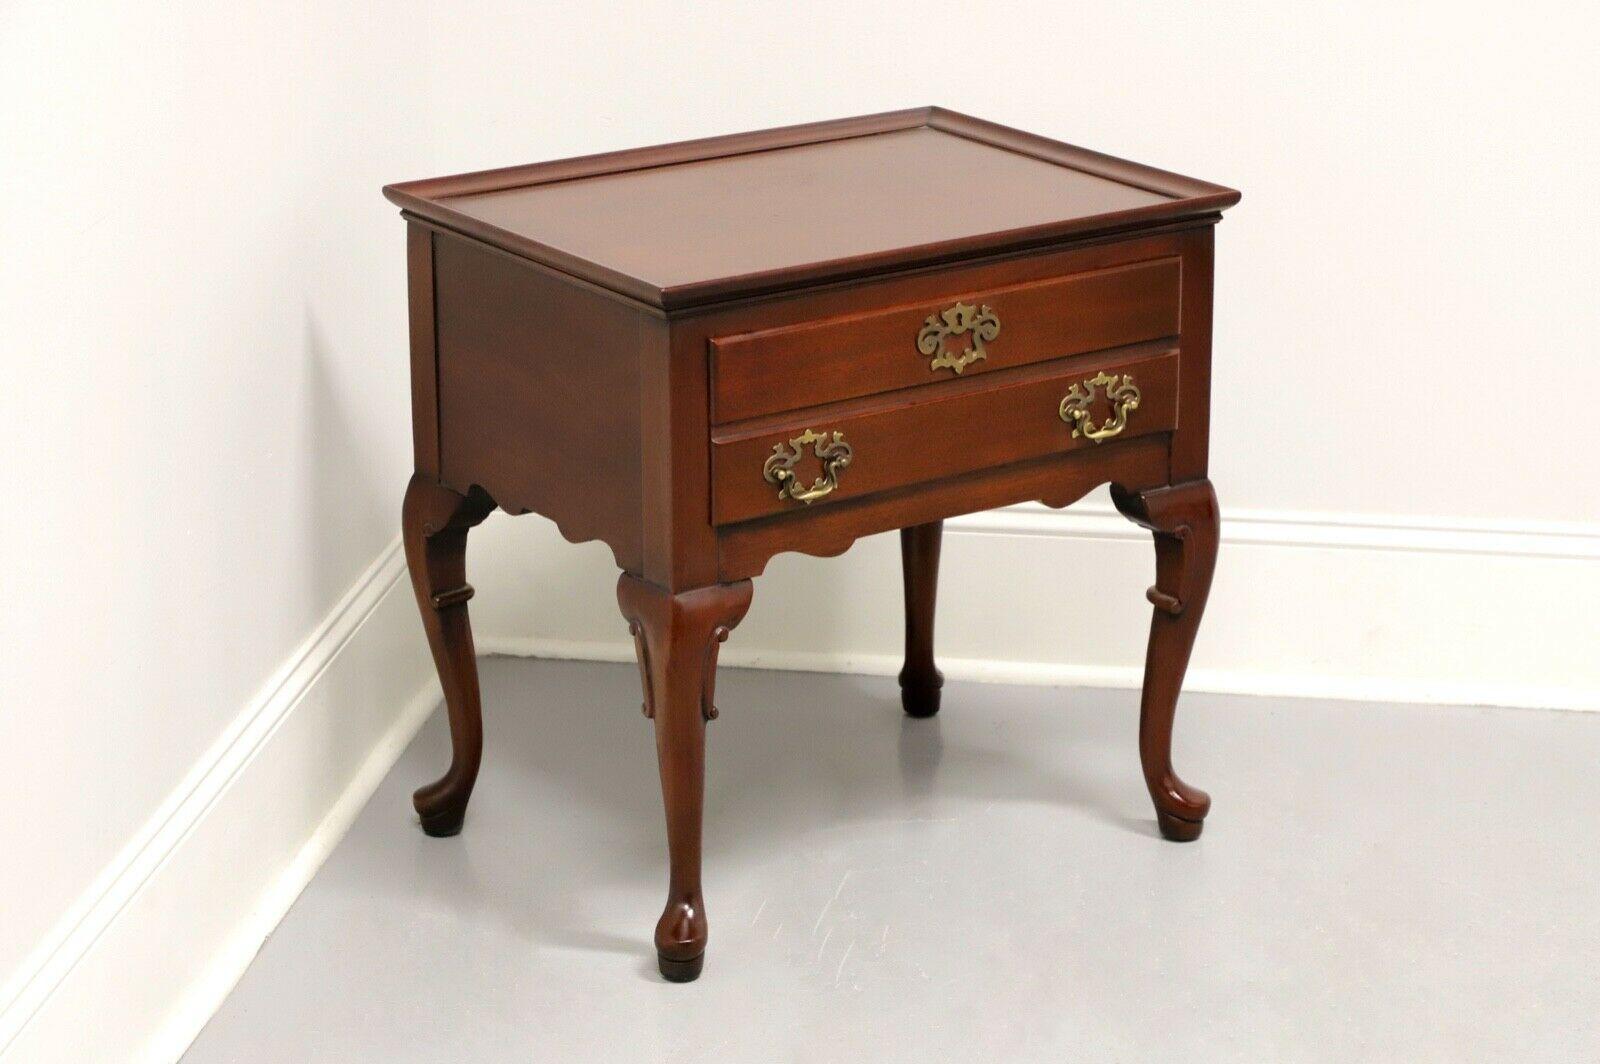 HICKORY CHAIR James River Mahogany Queen Anne Nightstand / Accent Side Table - A 2